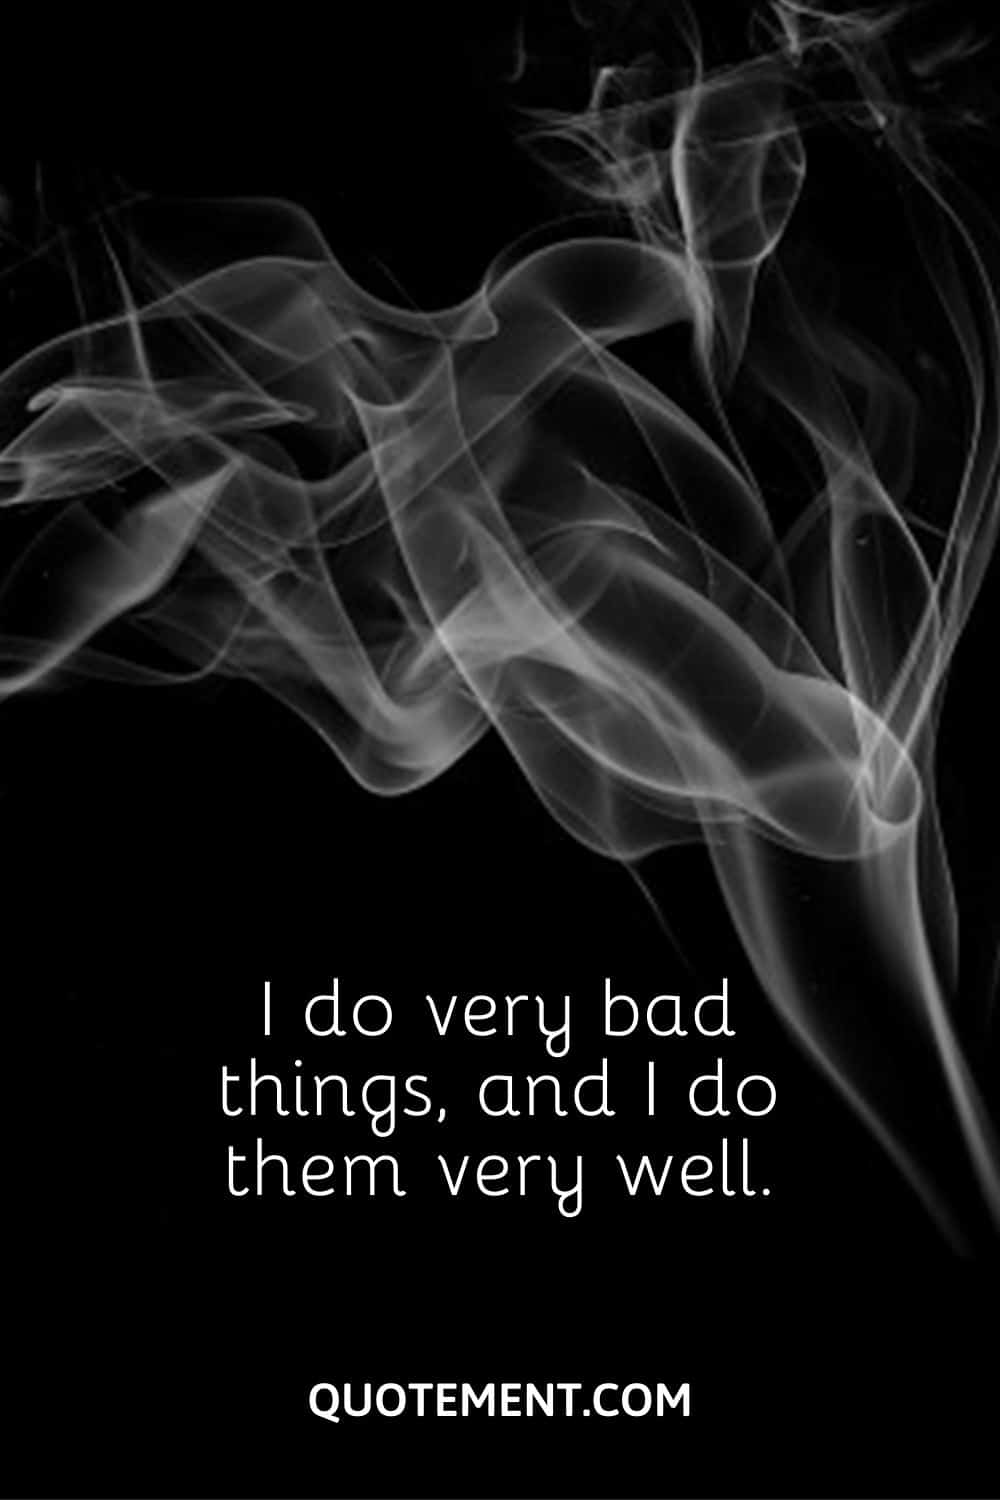 I do very bad things, and I do them very well.